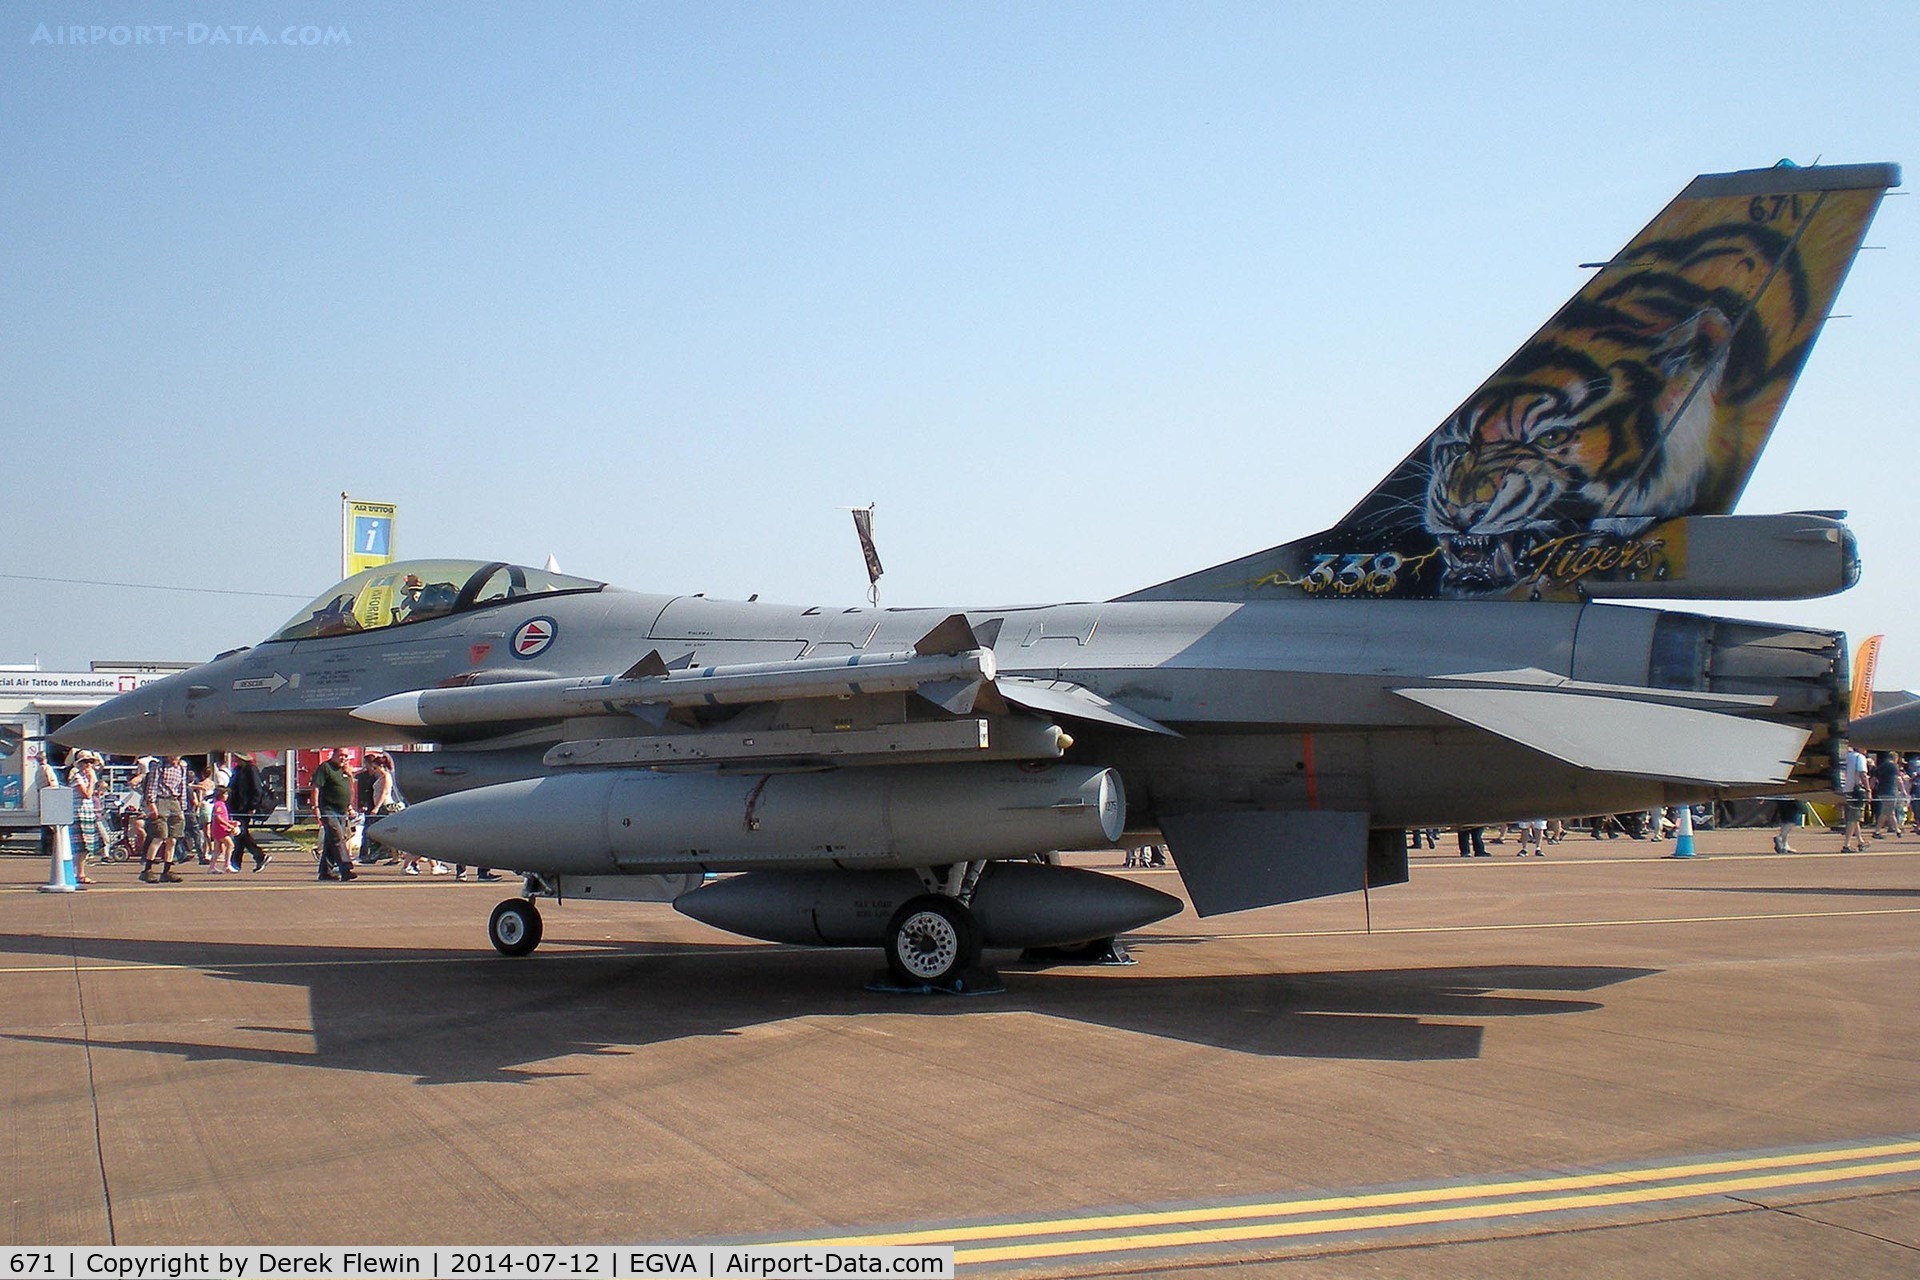 671, Fokker F-16AM Fighting Falcon C/N 6K-43, RIAT 2014, F-16AM Fighting Falcon, 338 Skvadron, Royal Norwegian Air Force, based at Orland, Seen on static Display.